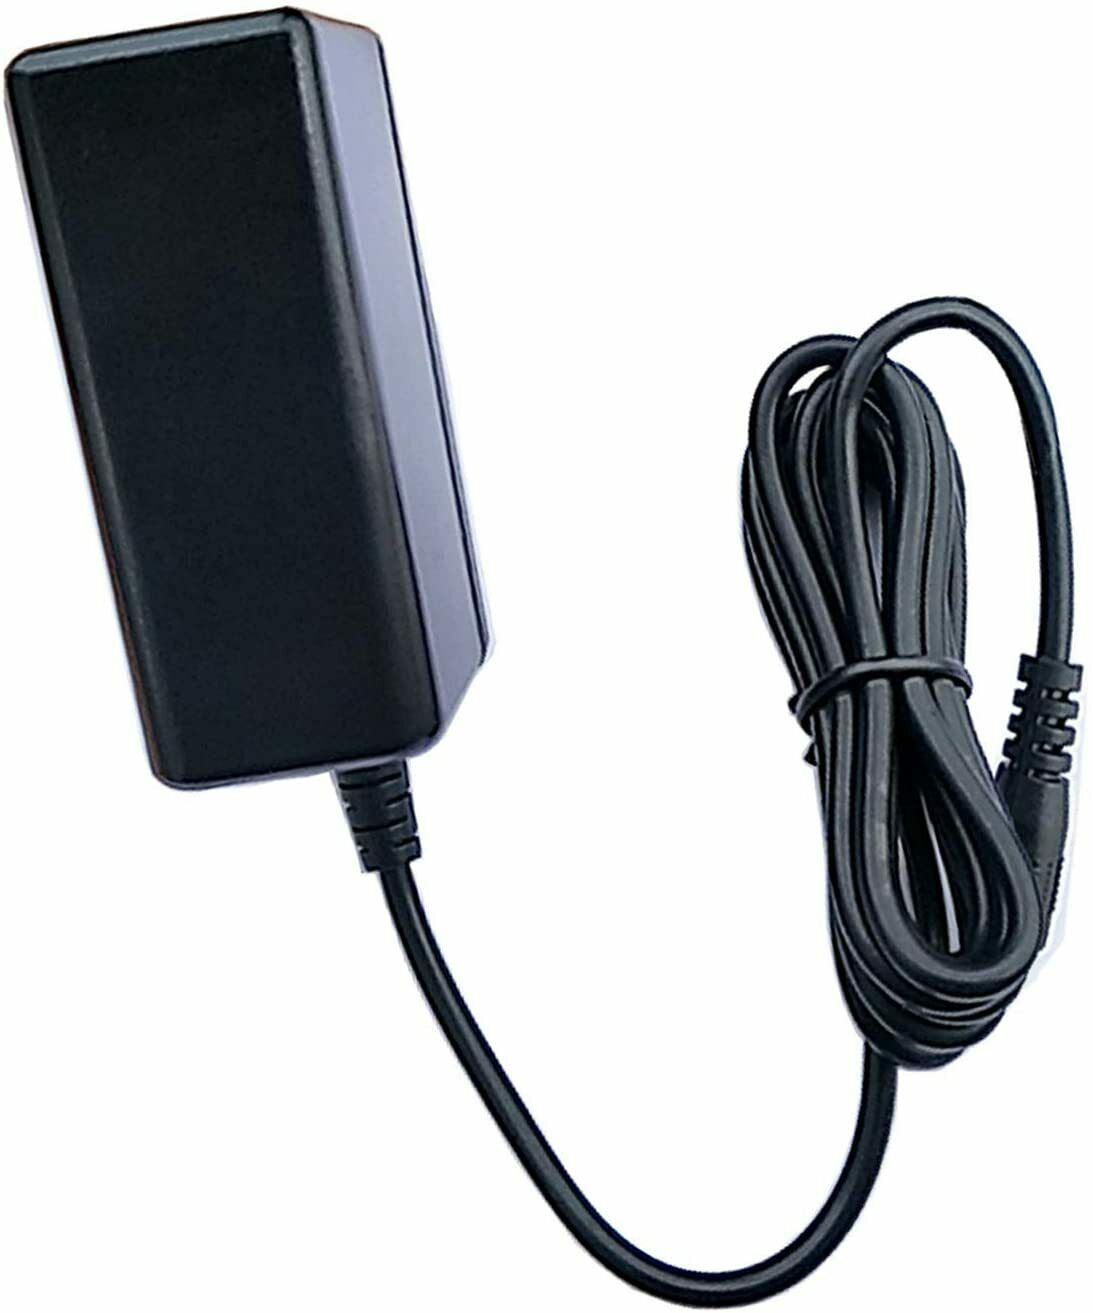 Power AC Adapter For Military ChillBuster Rechargeable Hypothermia Blanket Manufacturer Warranty: 12 month MPN: Does